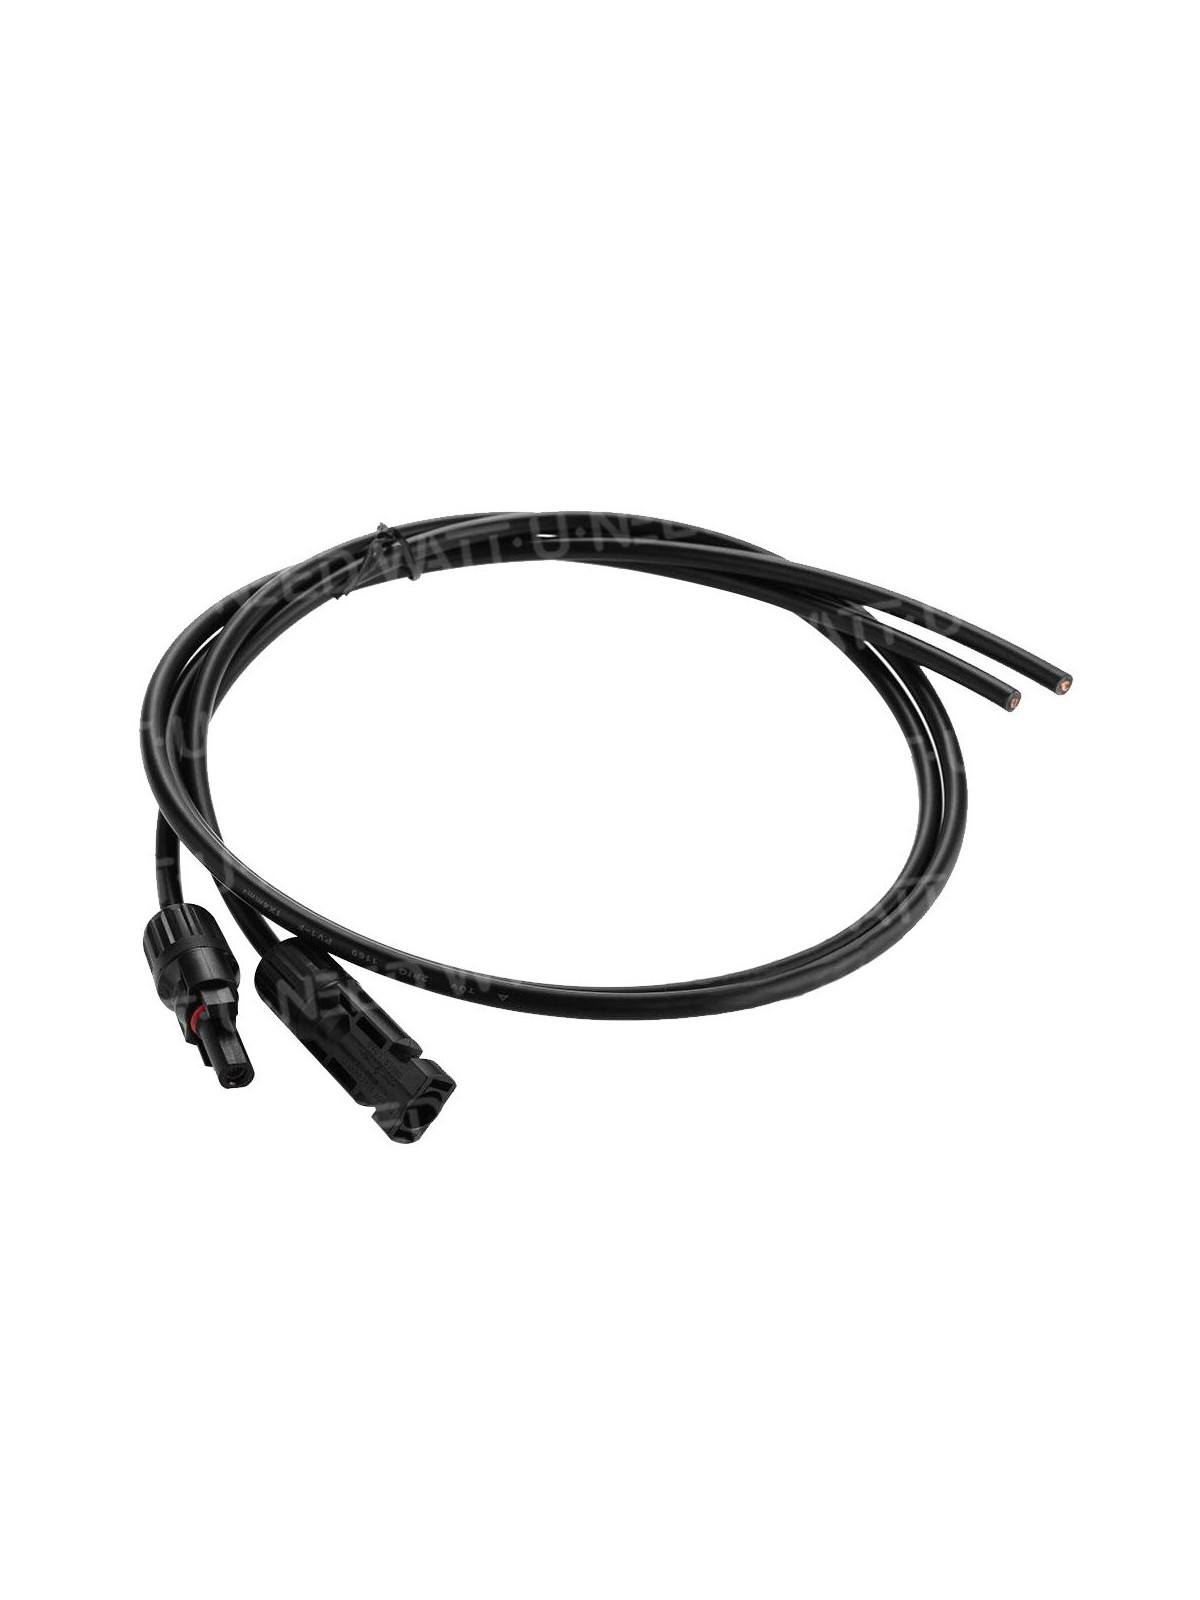 https://www.wattuneed.com/39856-product_zoom/cable-solaire-2x6mm-avec-type-mc4.jpg